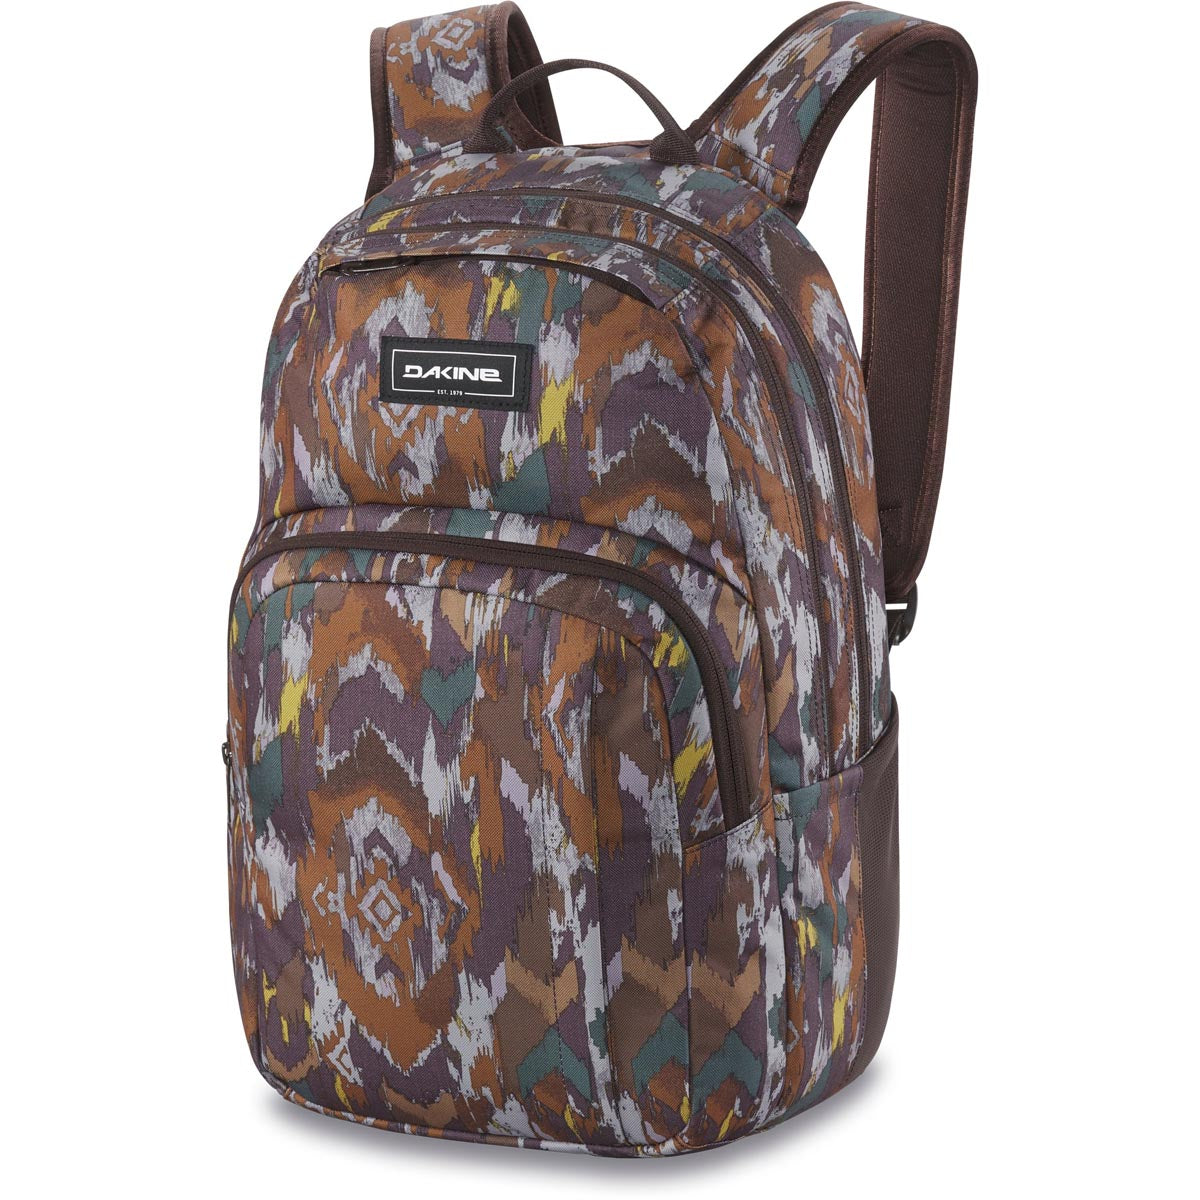 Dakine Campus M 25l Backpack - Painted Canyon image 1